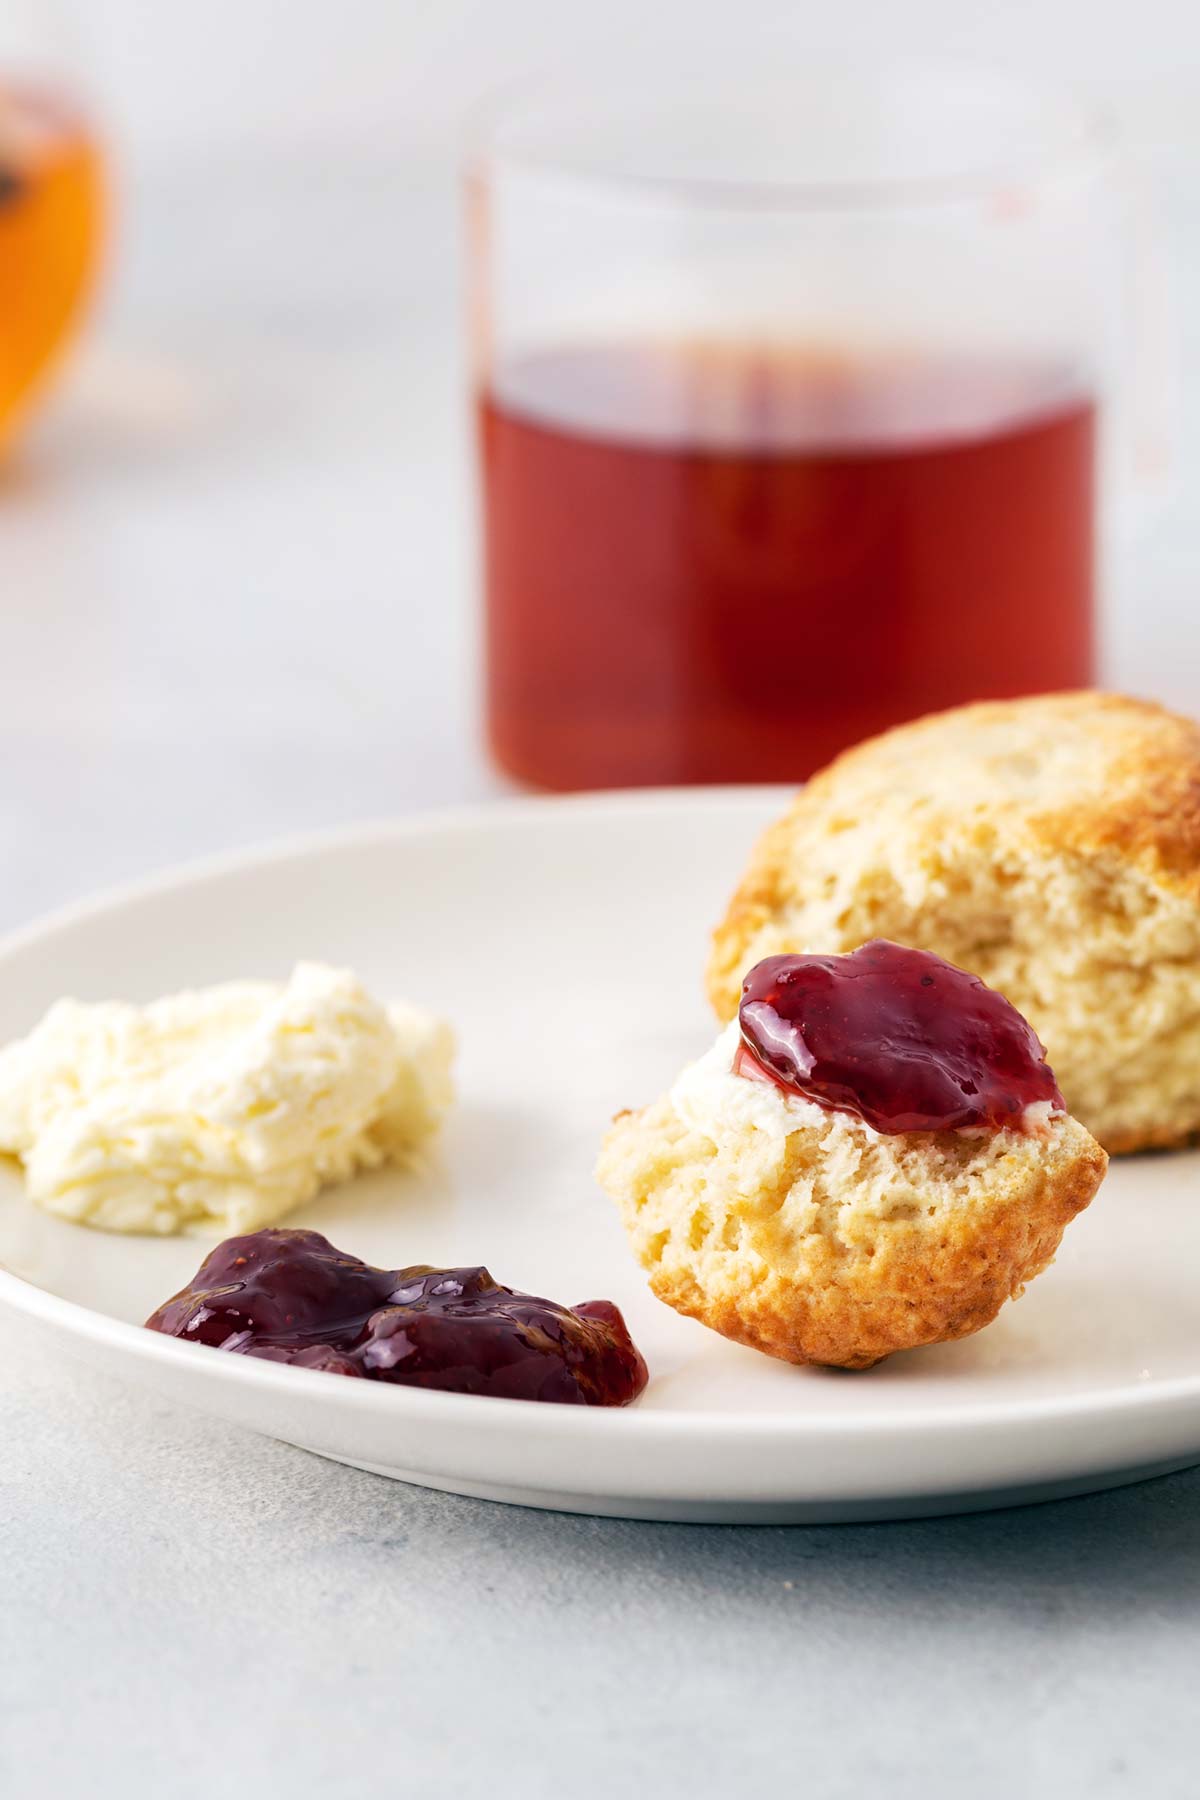 Open scone on plate with clotted cream and jam.